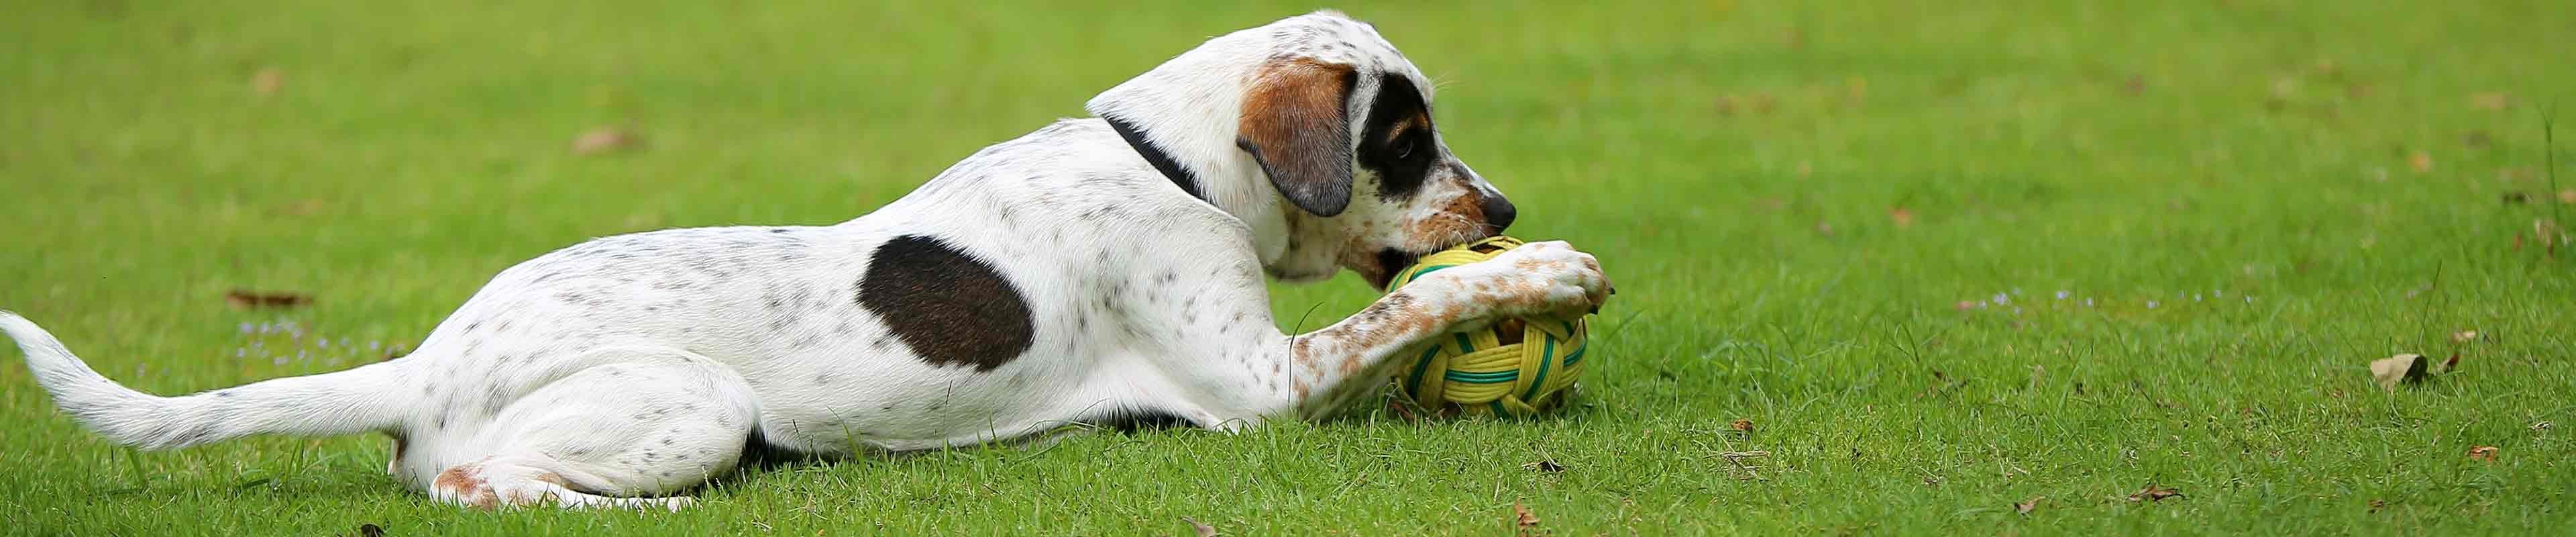 A dog plays with a ball in safe, pet-proofed yard.